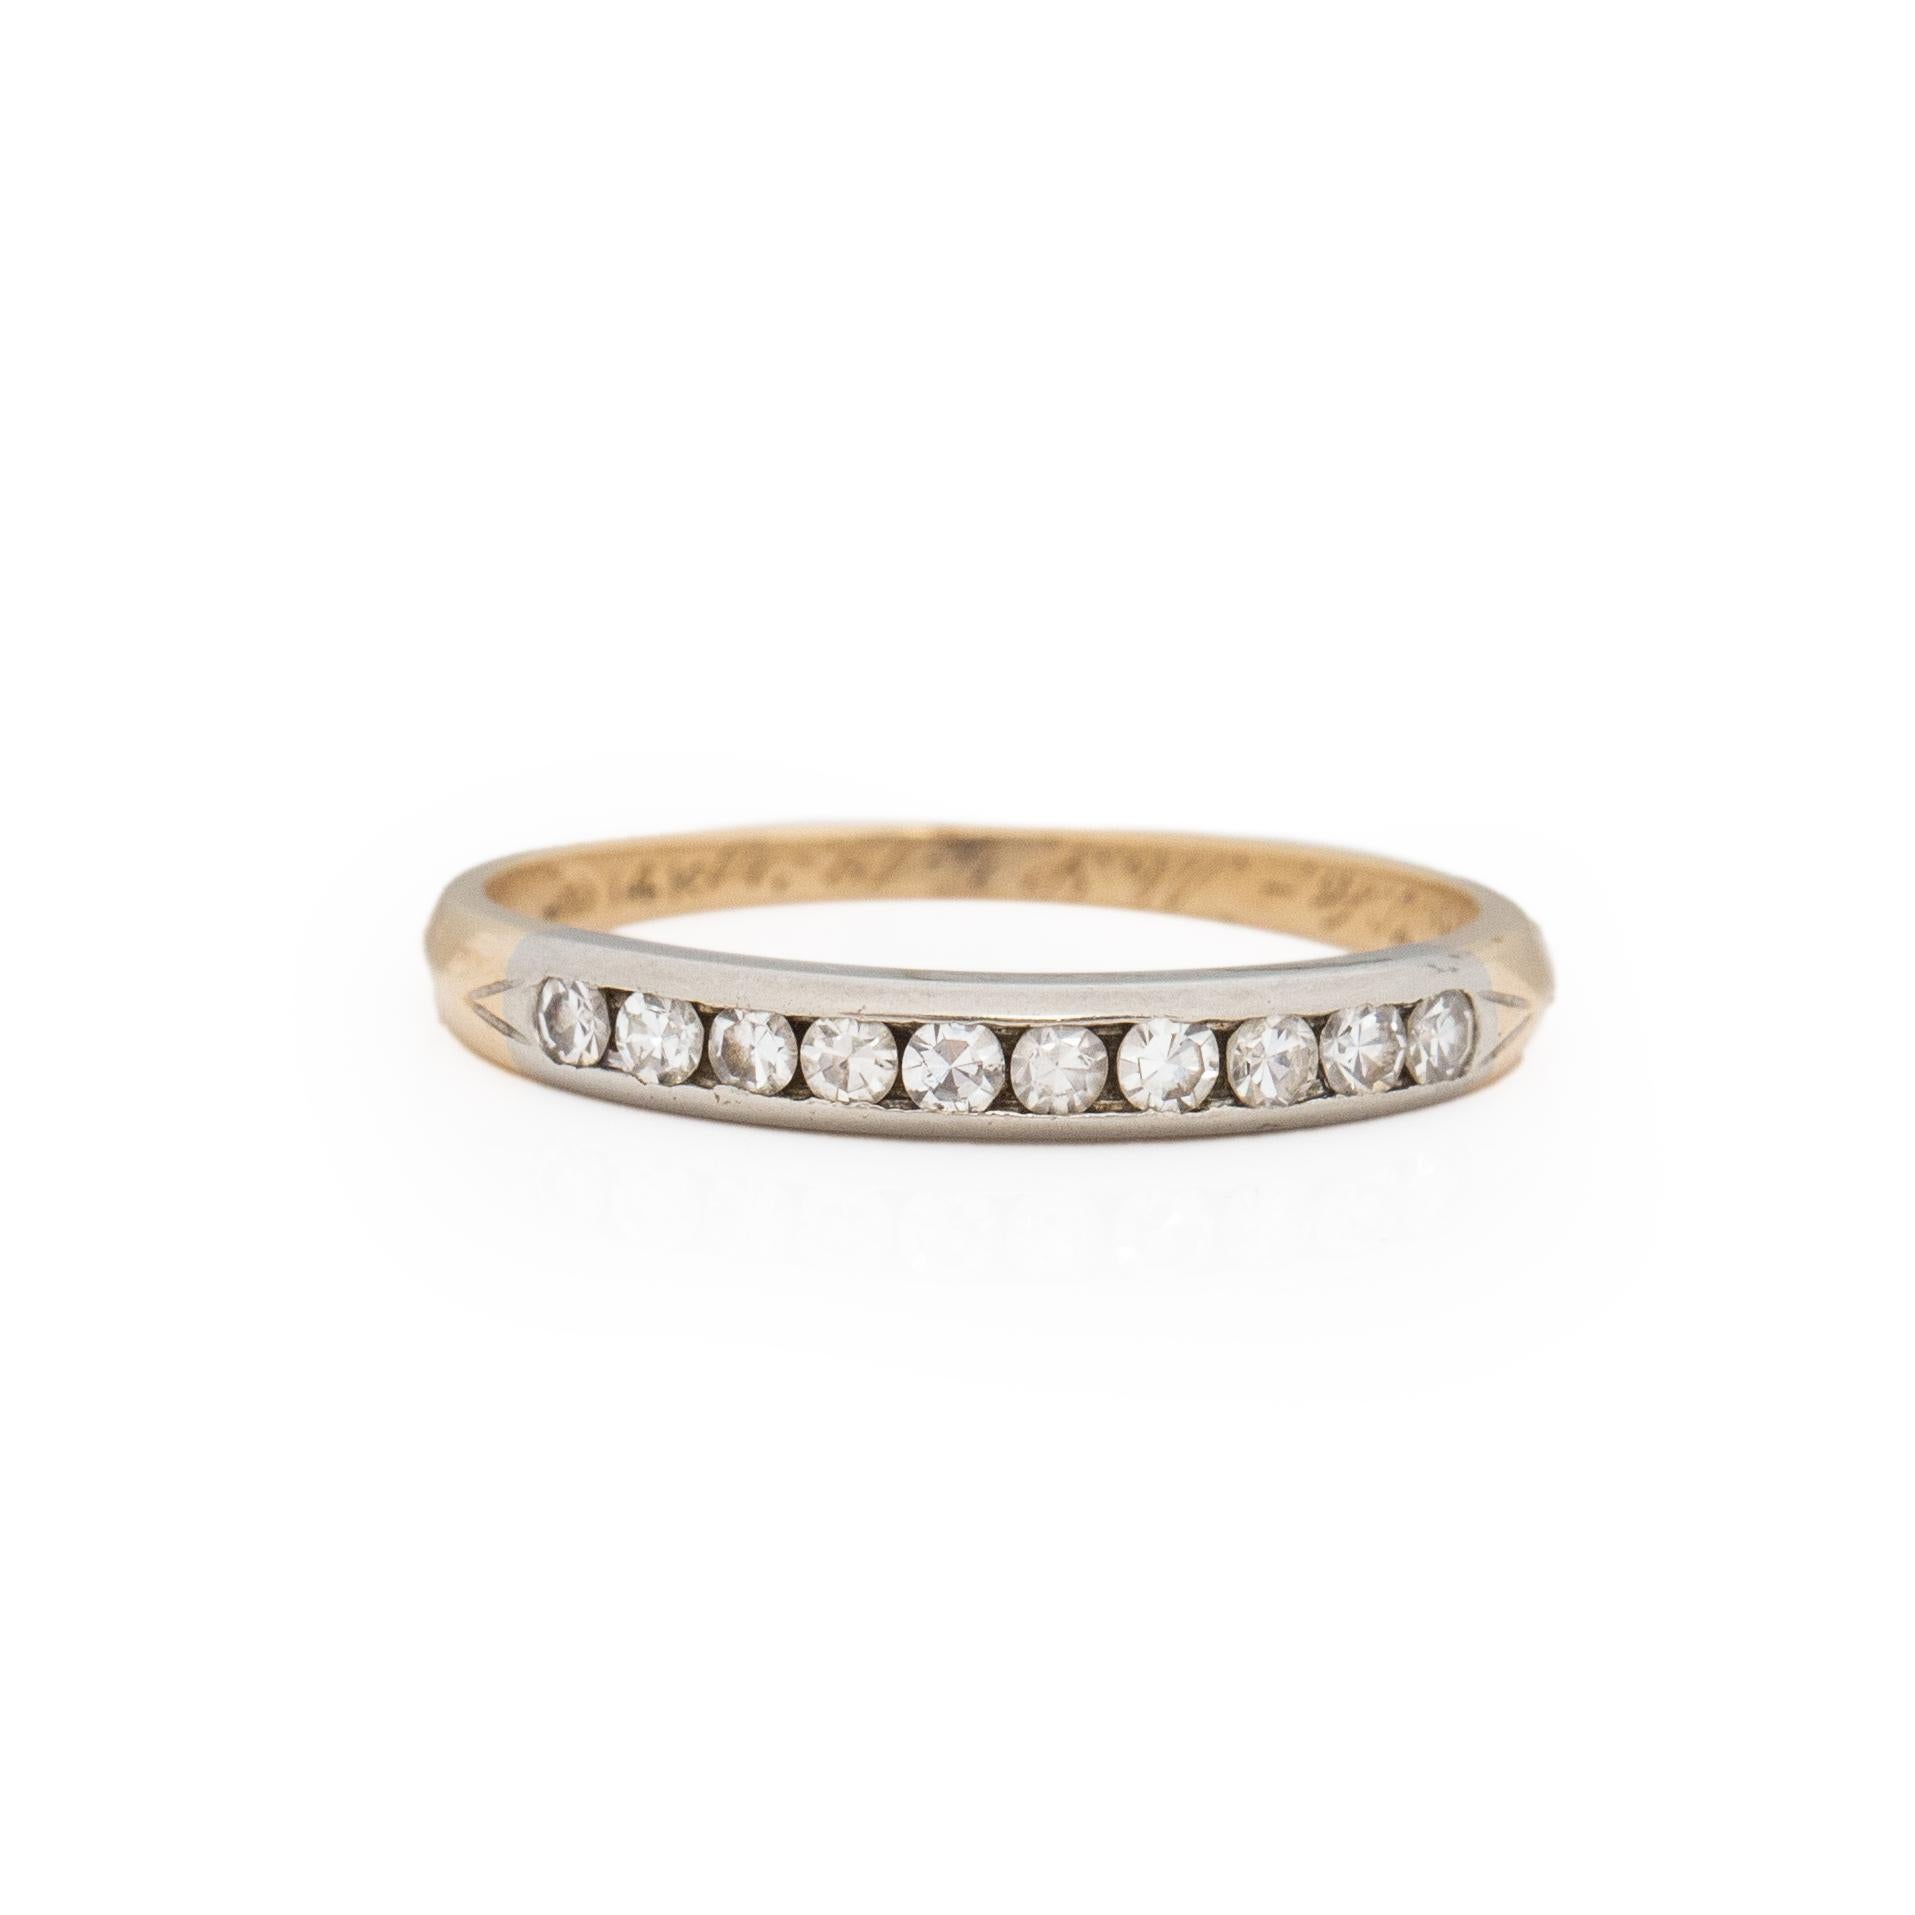 This beautiful little band is a timeless vintage piece. Crafted in 14K yellow gold with a white gold channel holding the diamonds this piece will look great paired with a vintage engagement ring or any style. Engraved with initials and a forever